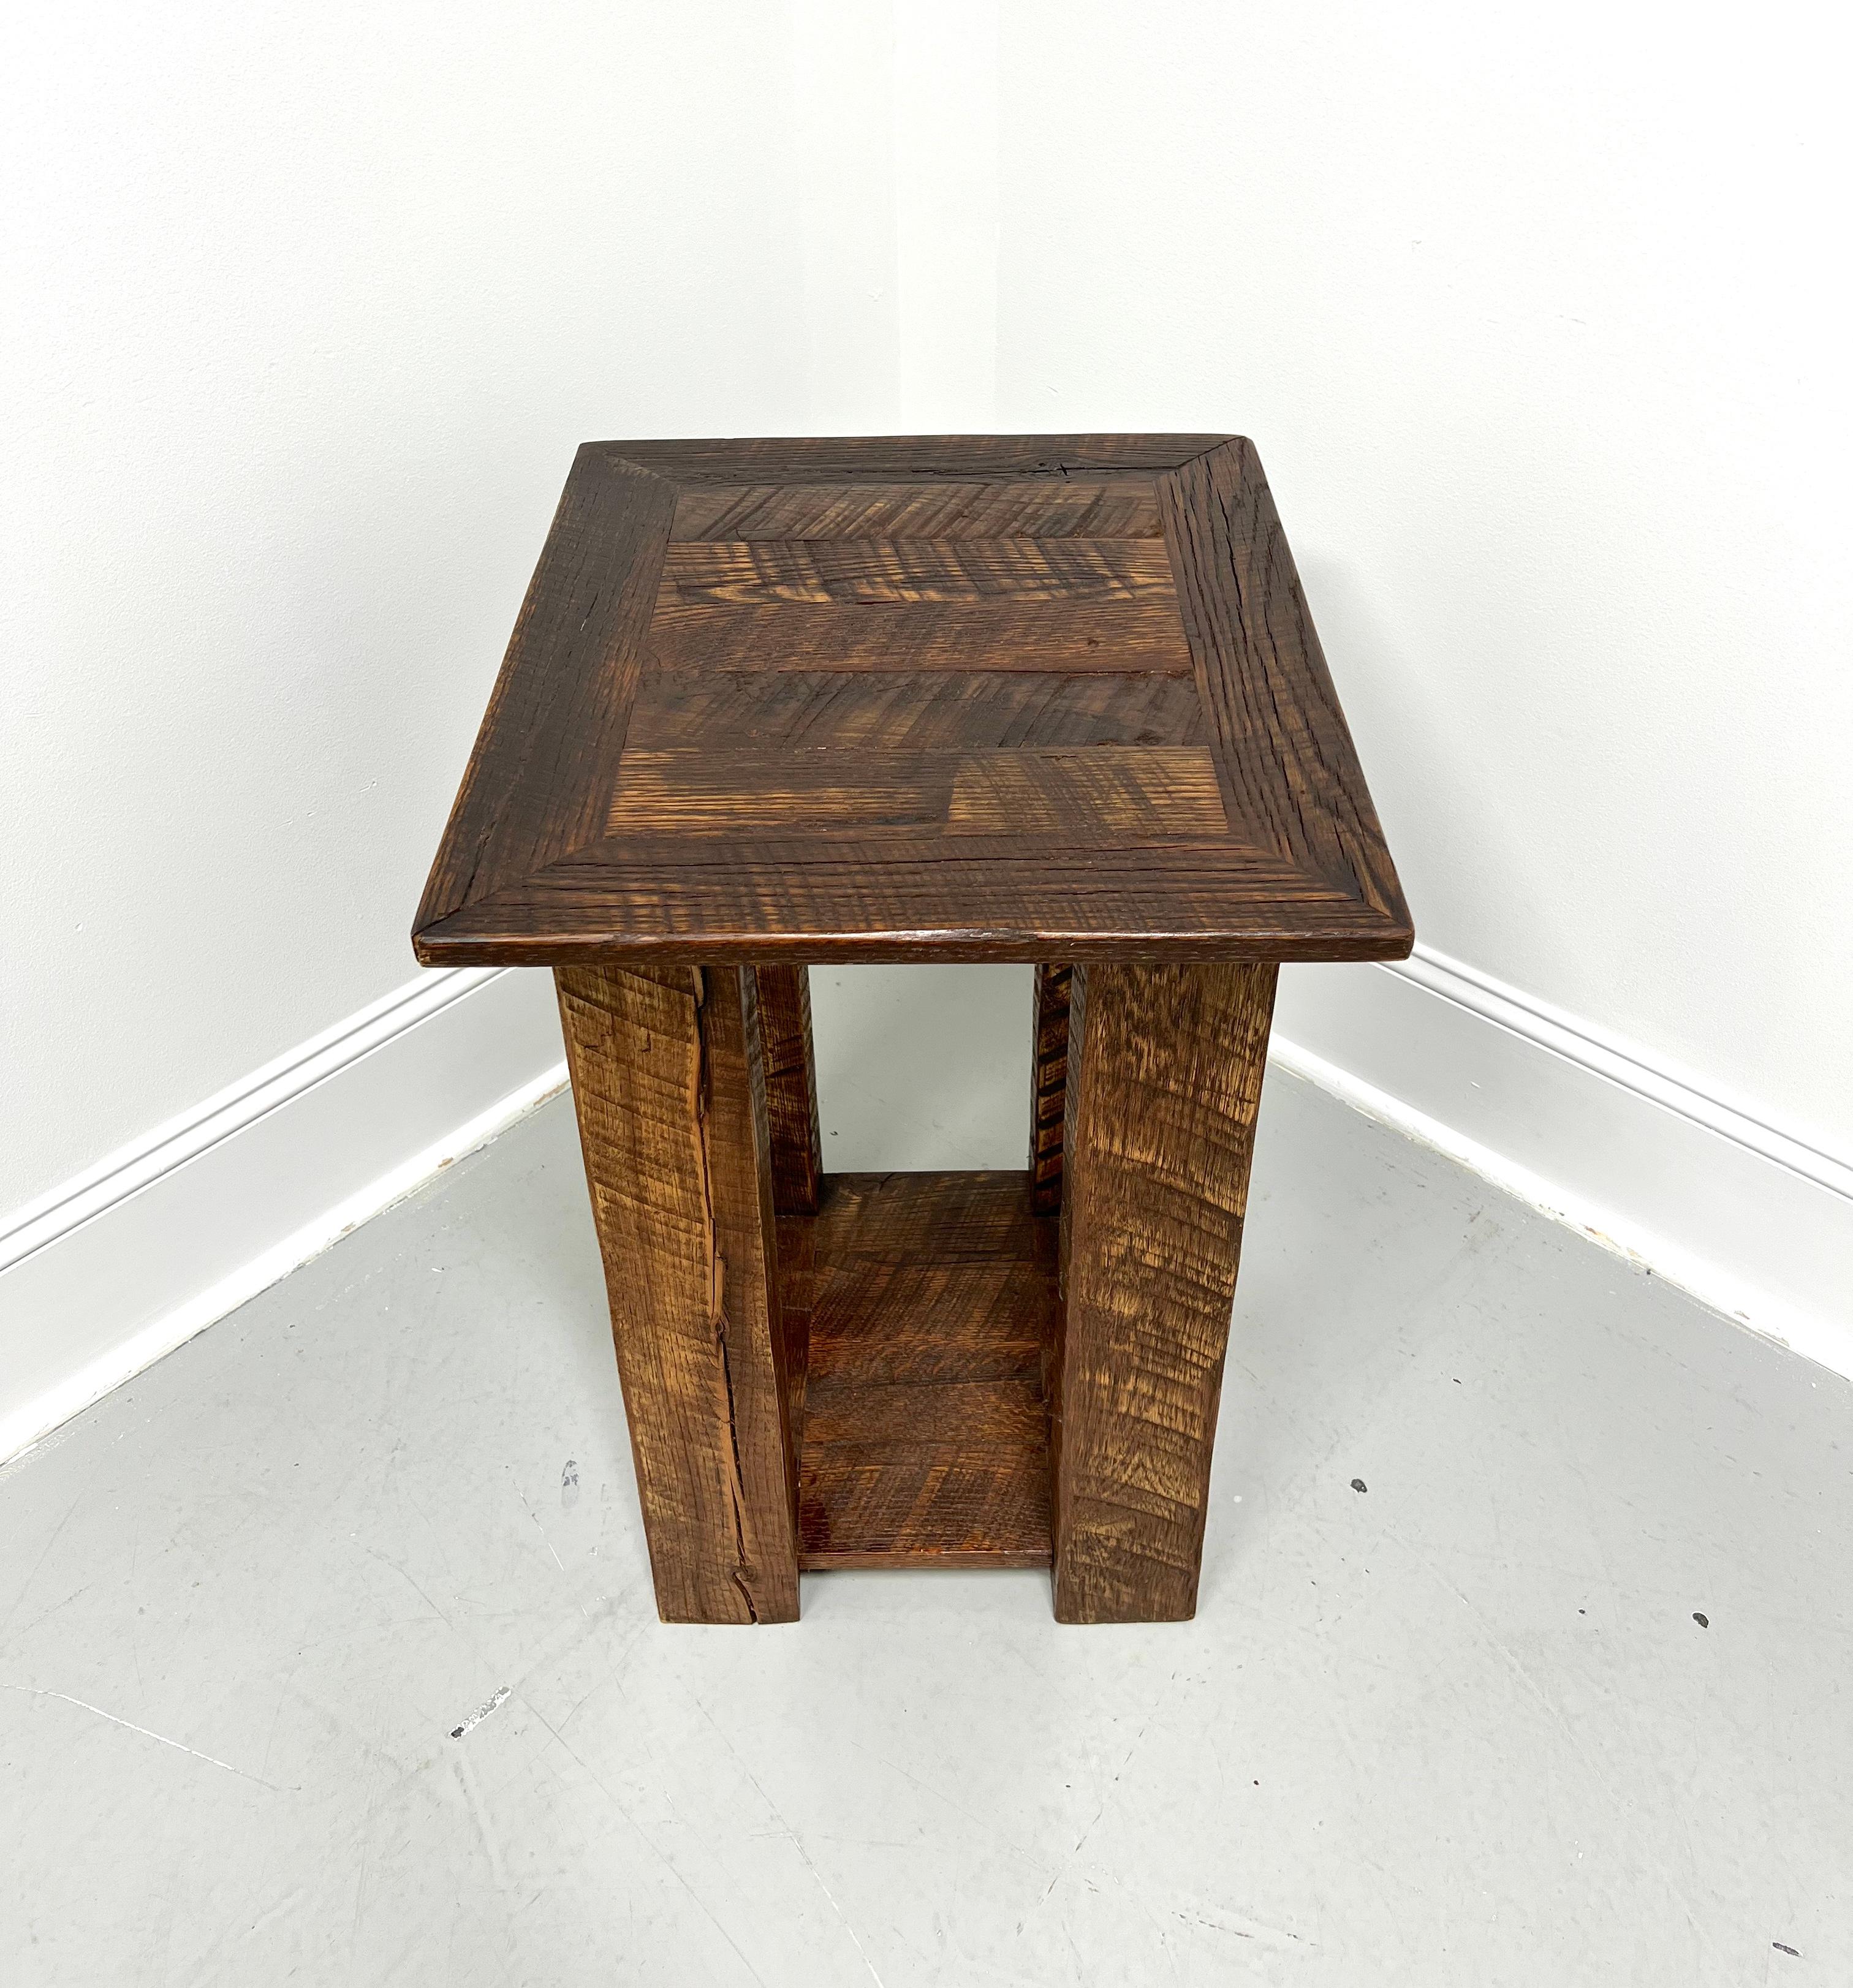 A Rustic style benchmade accent table, unbranded. Solid oak, banded plank top with squared edge, undertier shelf, and solid square straight legs. Made in the USA, in the mid 20th Century.

Measures: 21w 18d 27h

Exceptionally good vintage condition